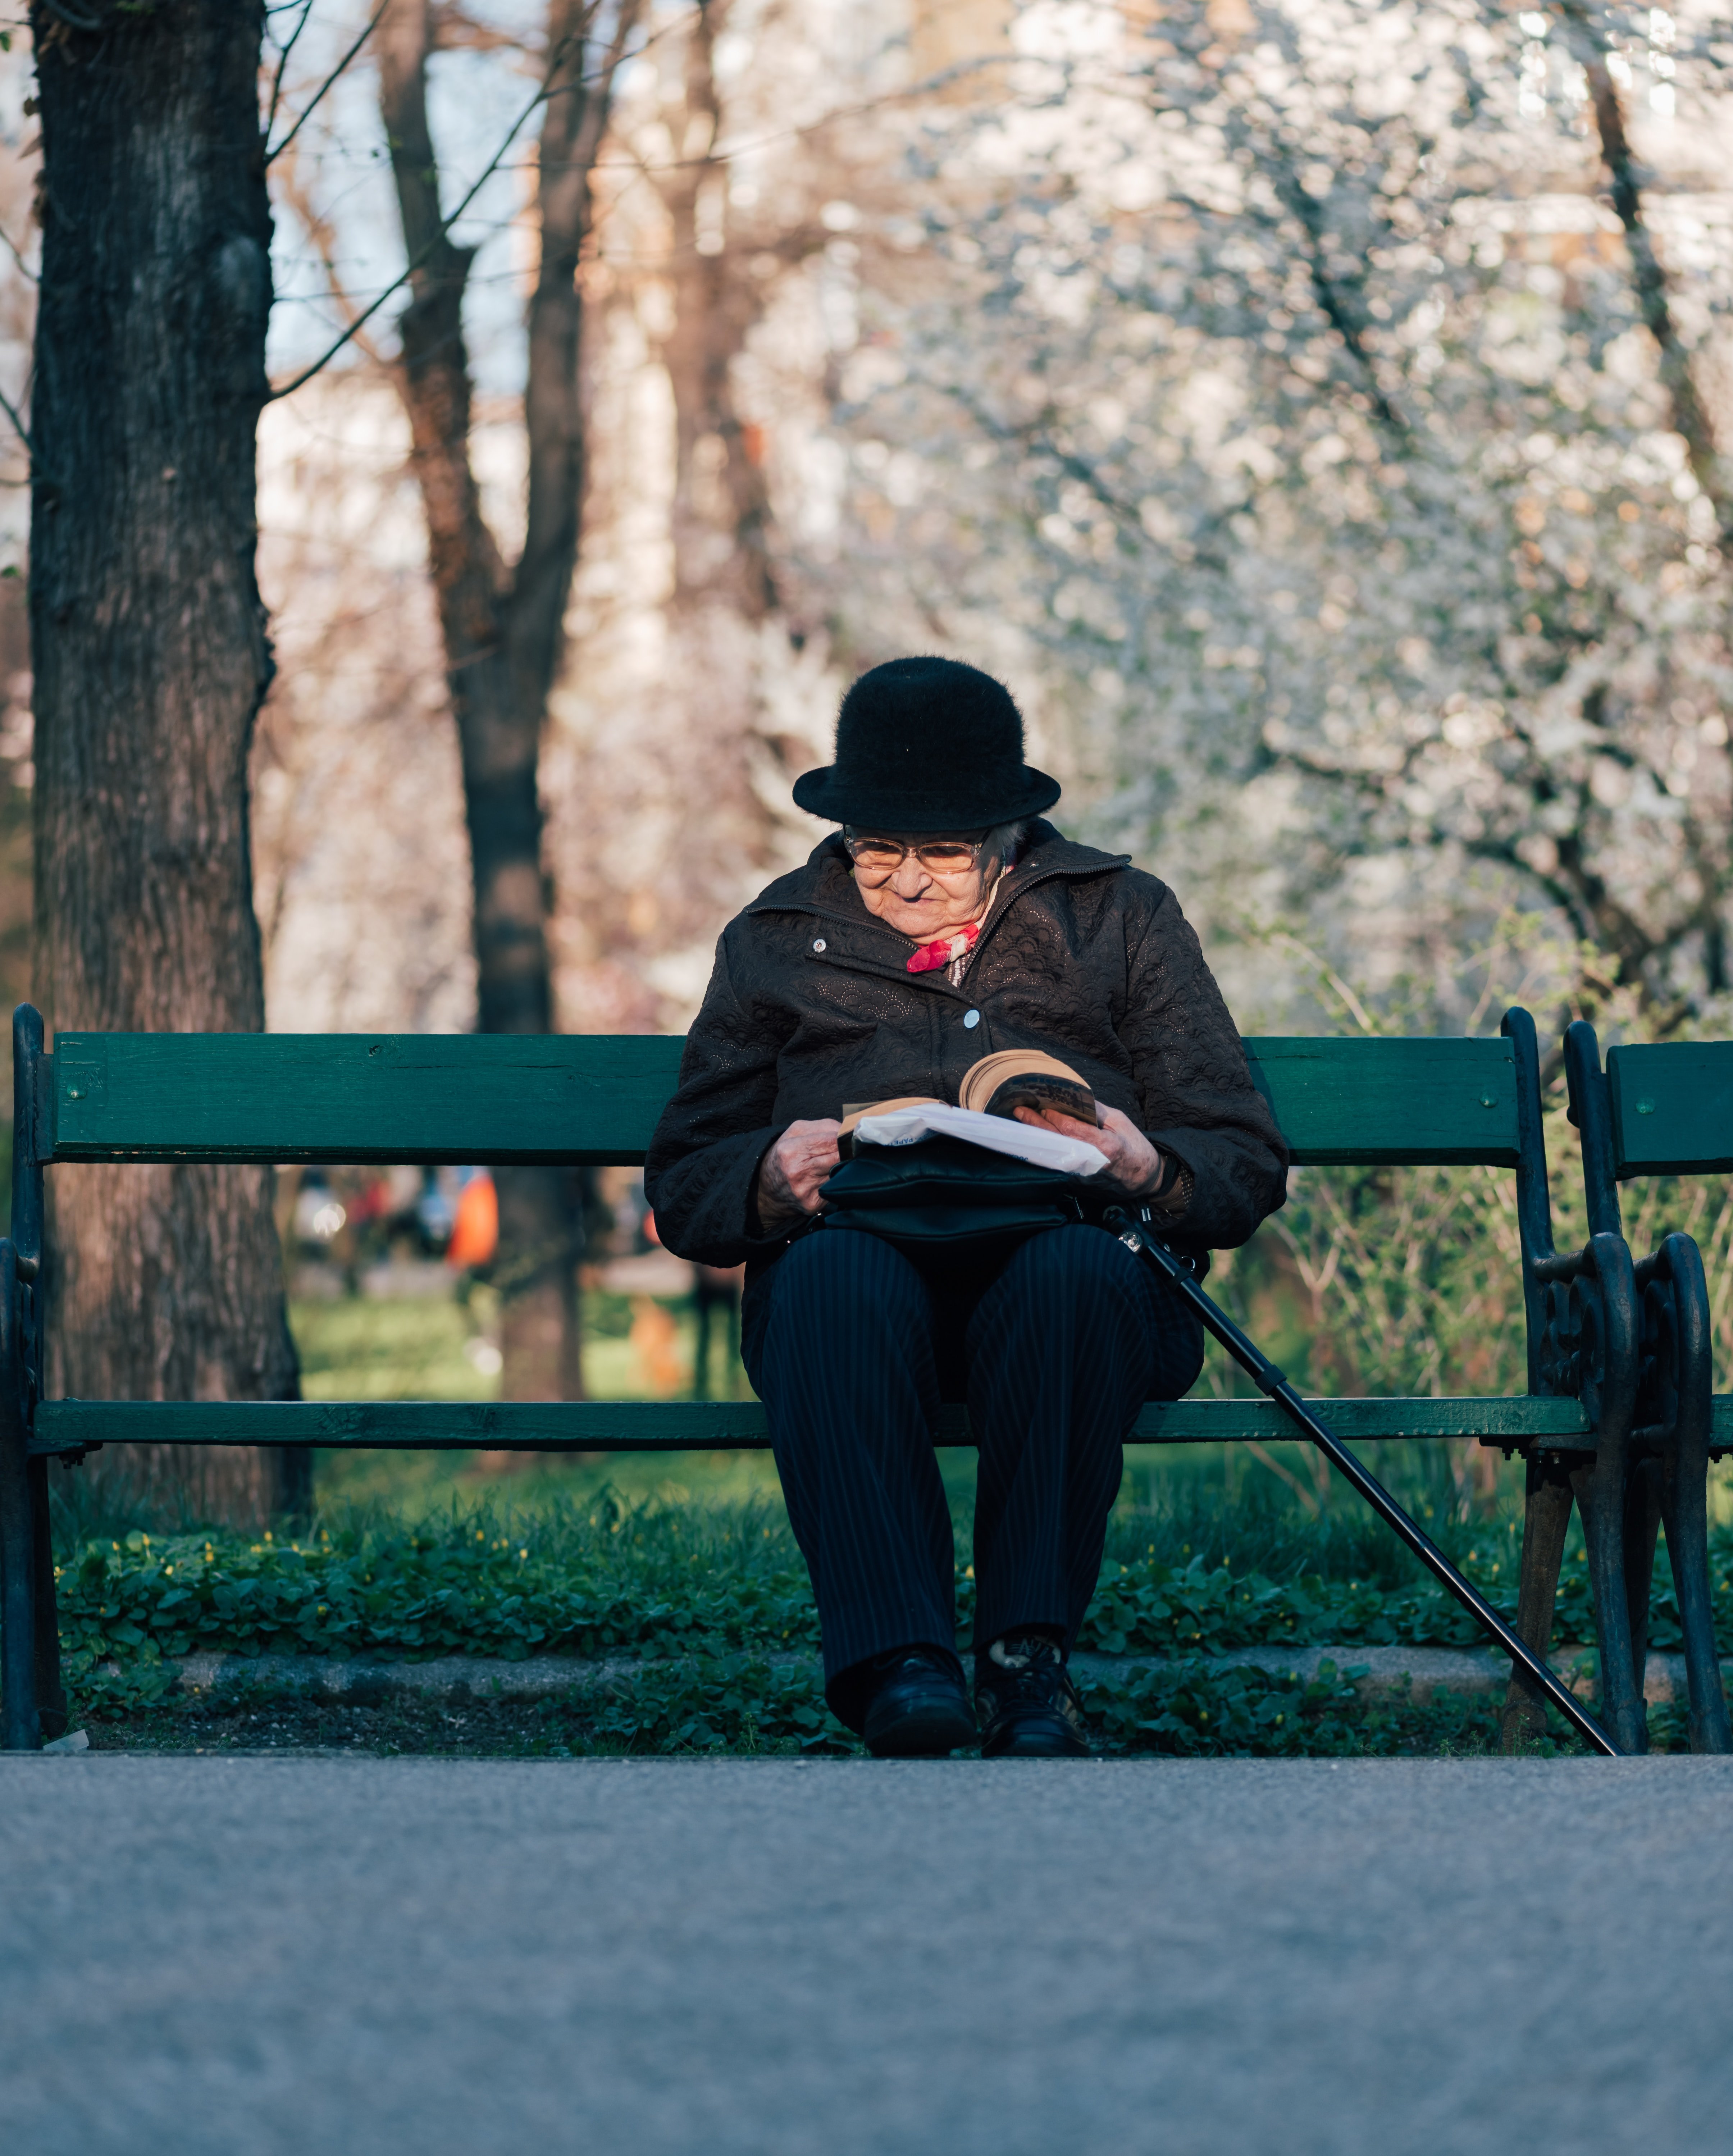 An ageing mother taking a moment to read over her letter| Photo by Alex Blăjan on Unsplash